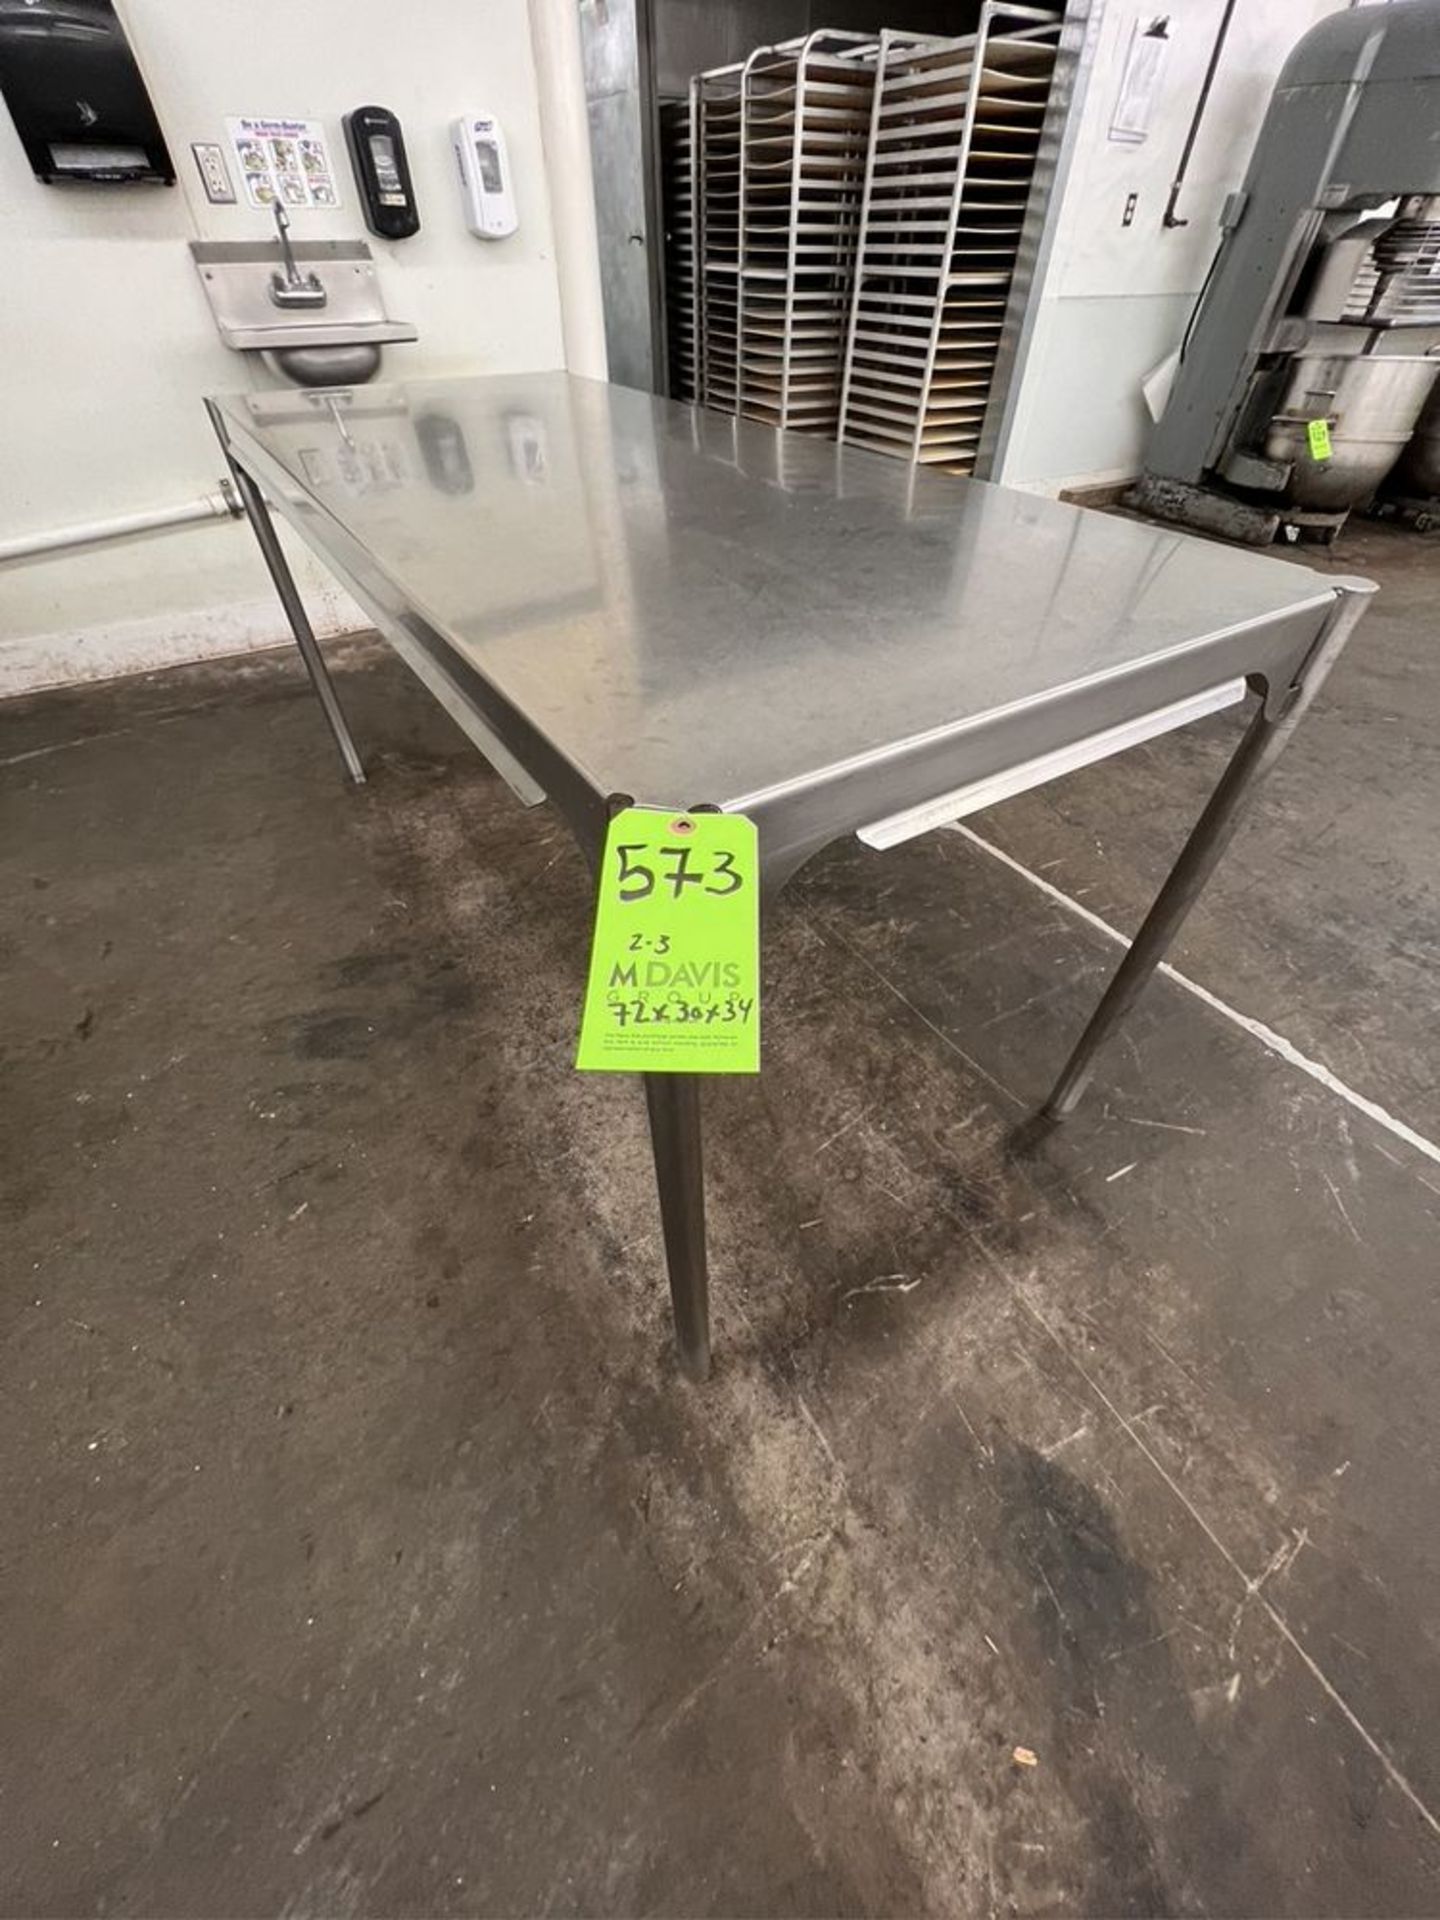 (3) S/S TABLES, (1) WITH EDLUND CAN OPENER,  APPROX. DIMS 72 X 30 X 34, 72 X 30 X 34, 72 X 30 X 32 - Image 3 of 5